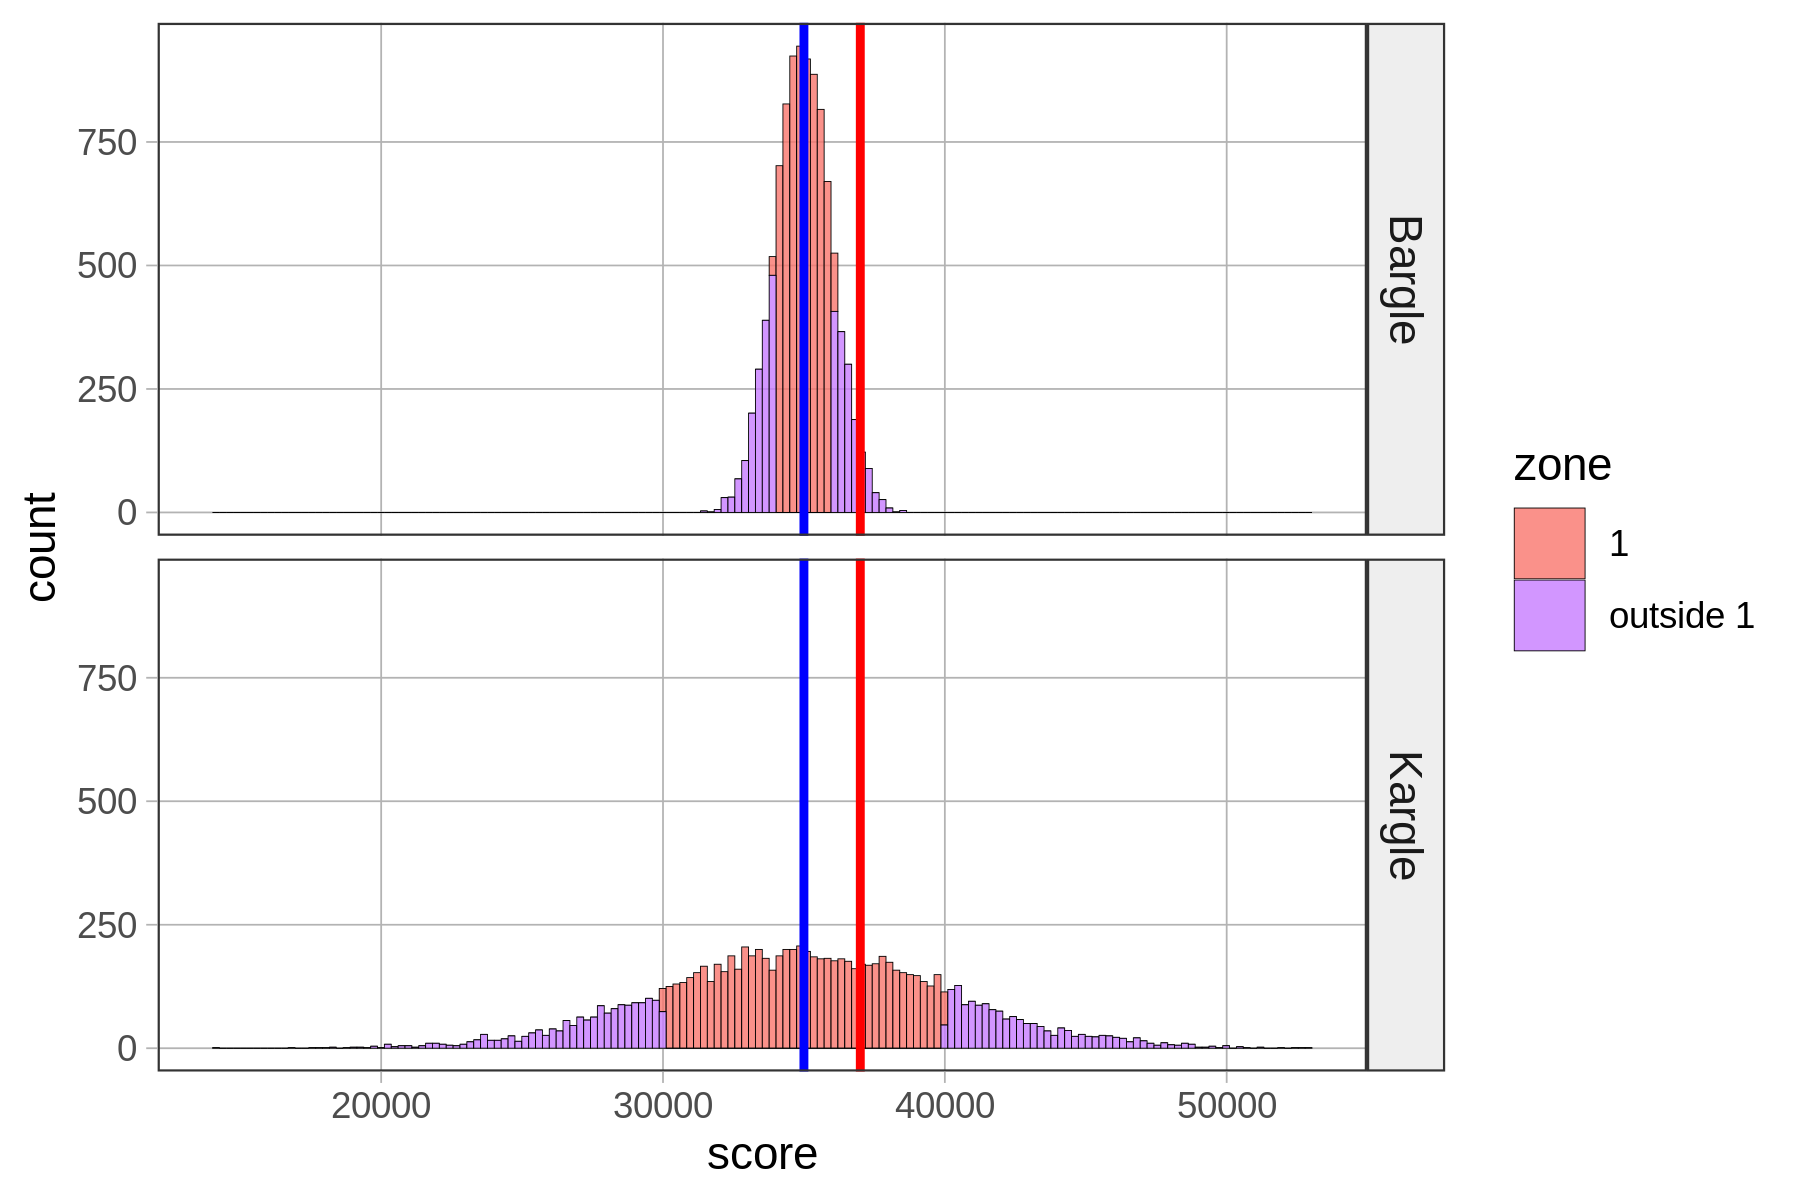 A histogram of the distribution of score in Bargle with a vertical line in blue showing the mean of 35,000 points and another vertical line in red showing a score of 37,000 points on the top. Zone 1 is shaded in teal, and the area outside of zone 1 is shaded in purple. The vertical line in red passes through the purple area. A histogram of the distribution of score in Kargle with a vertical line in blue showing the mean of 35,000 points and another vertical line in red showing a score of 37,000 points at the bottom. Zone 1 is shaded in teal, and the area outside of zone 1 is shaded in purple. The vertical line in red passes through the teal area.